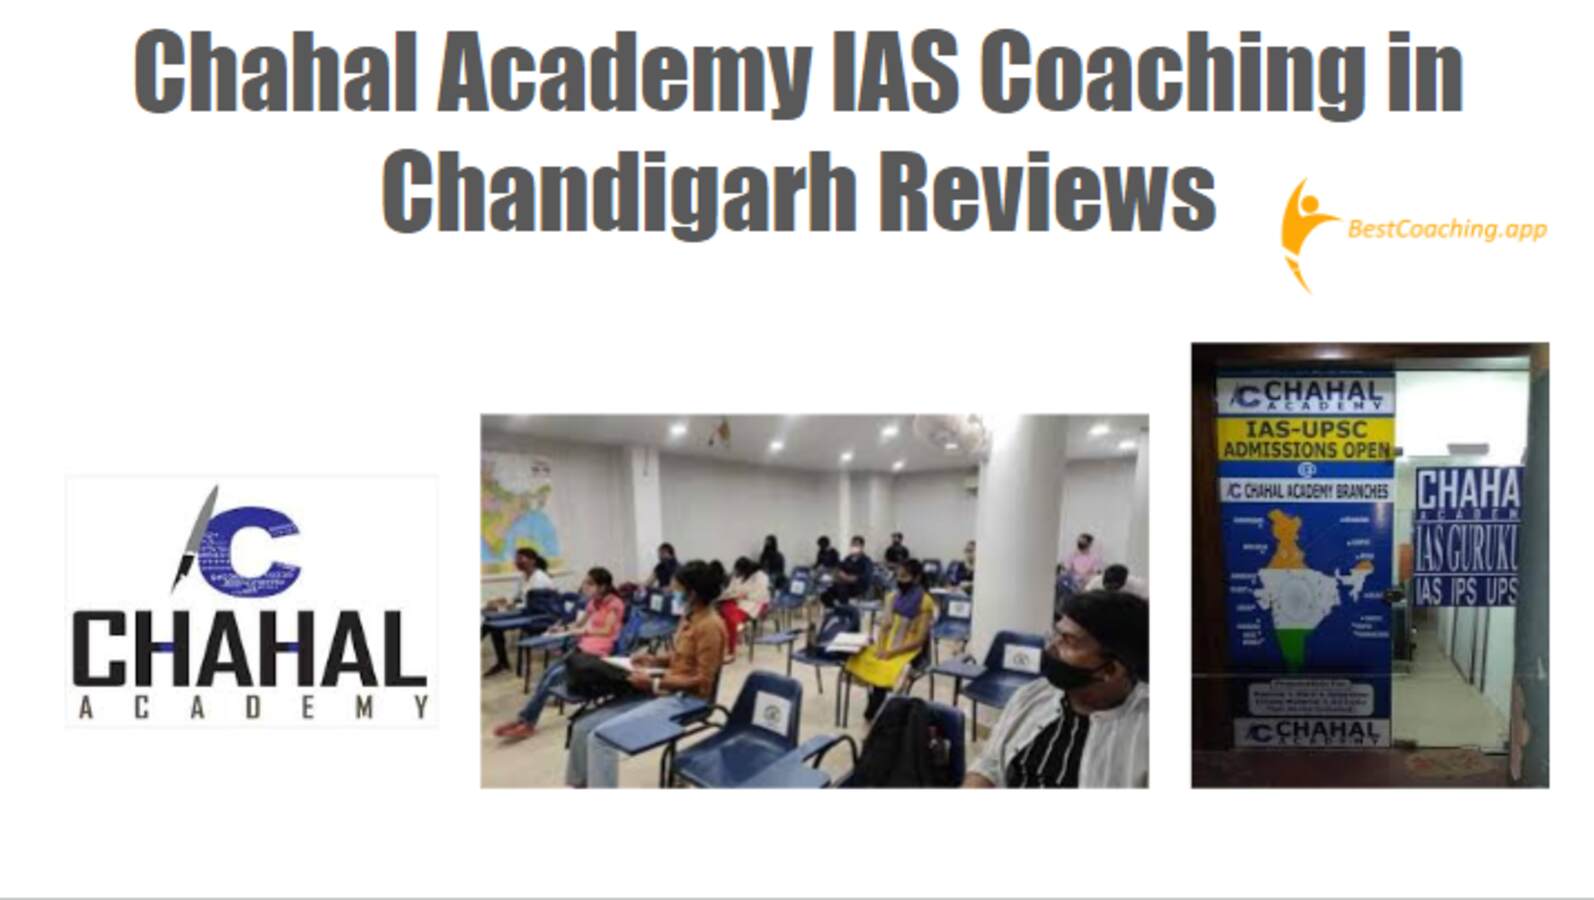 Chahal Academy IAS Coaching in Chandigarh Reviews